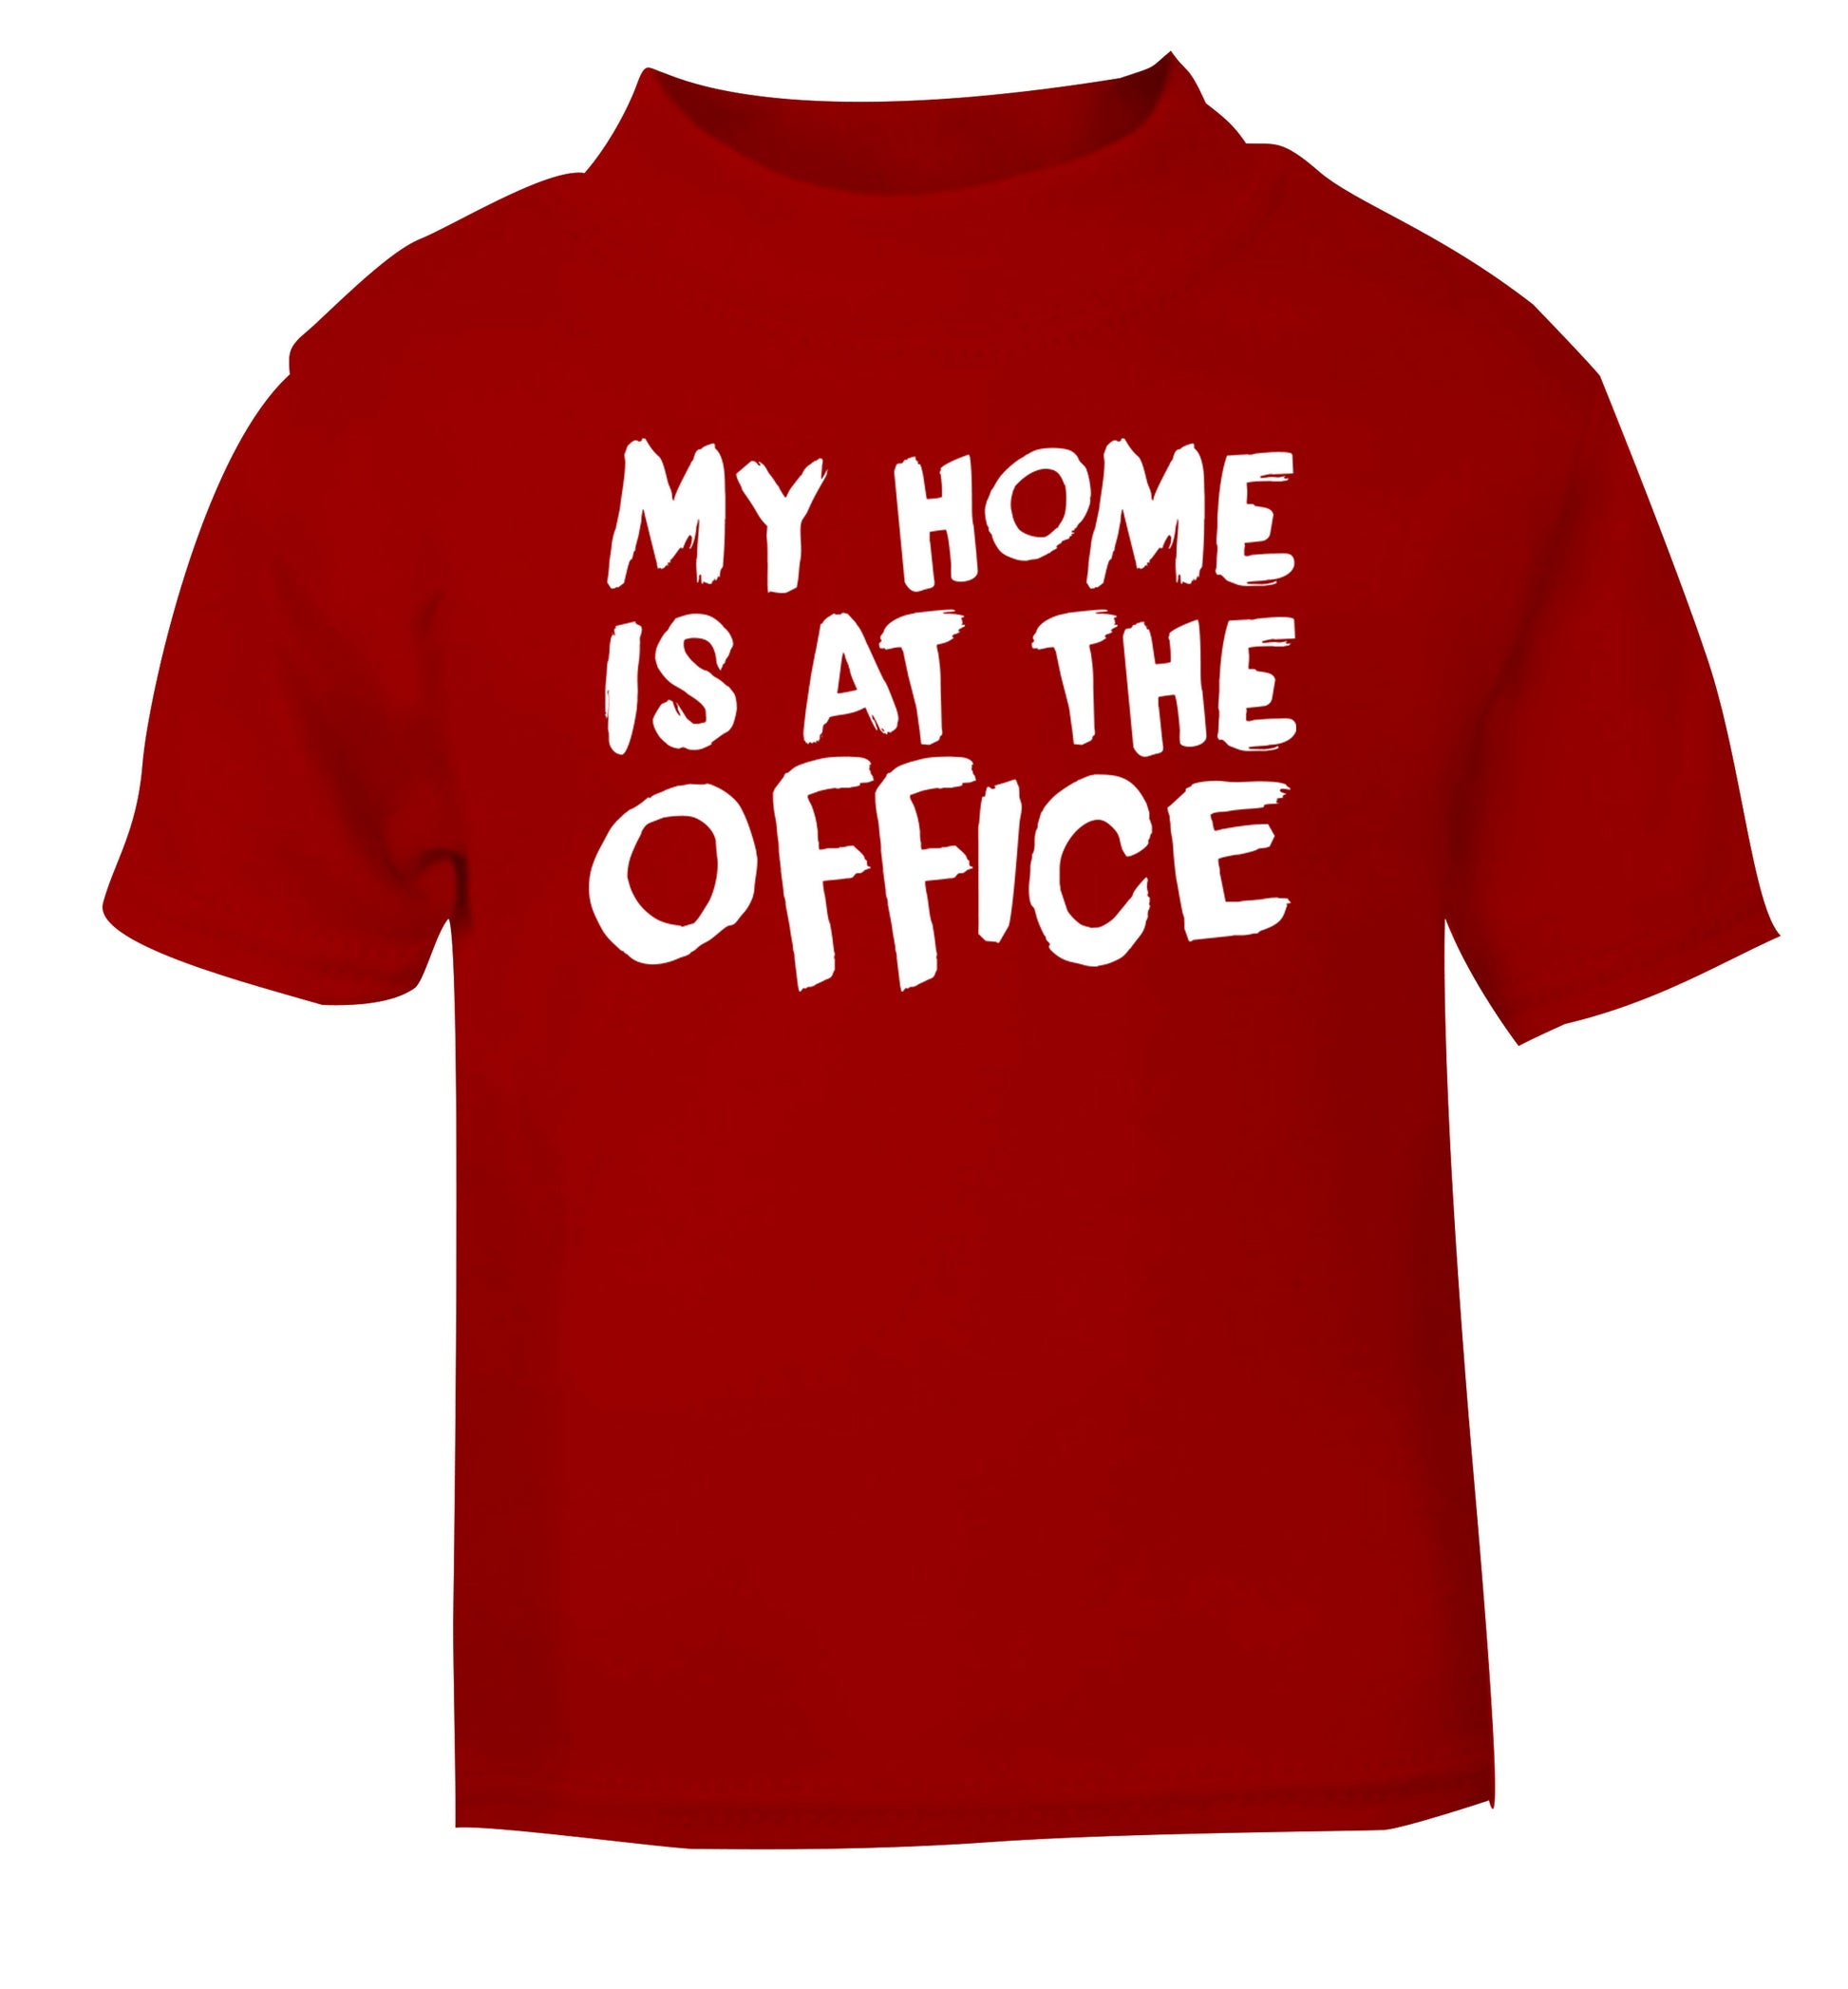 My home is at the office red Baby Toddler Tshirt 2 Years